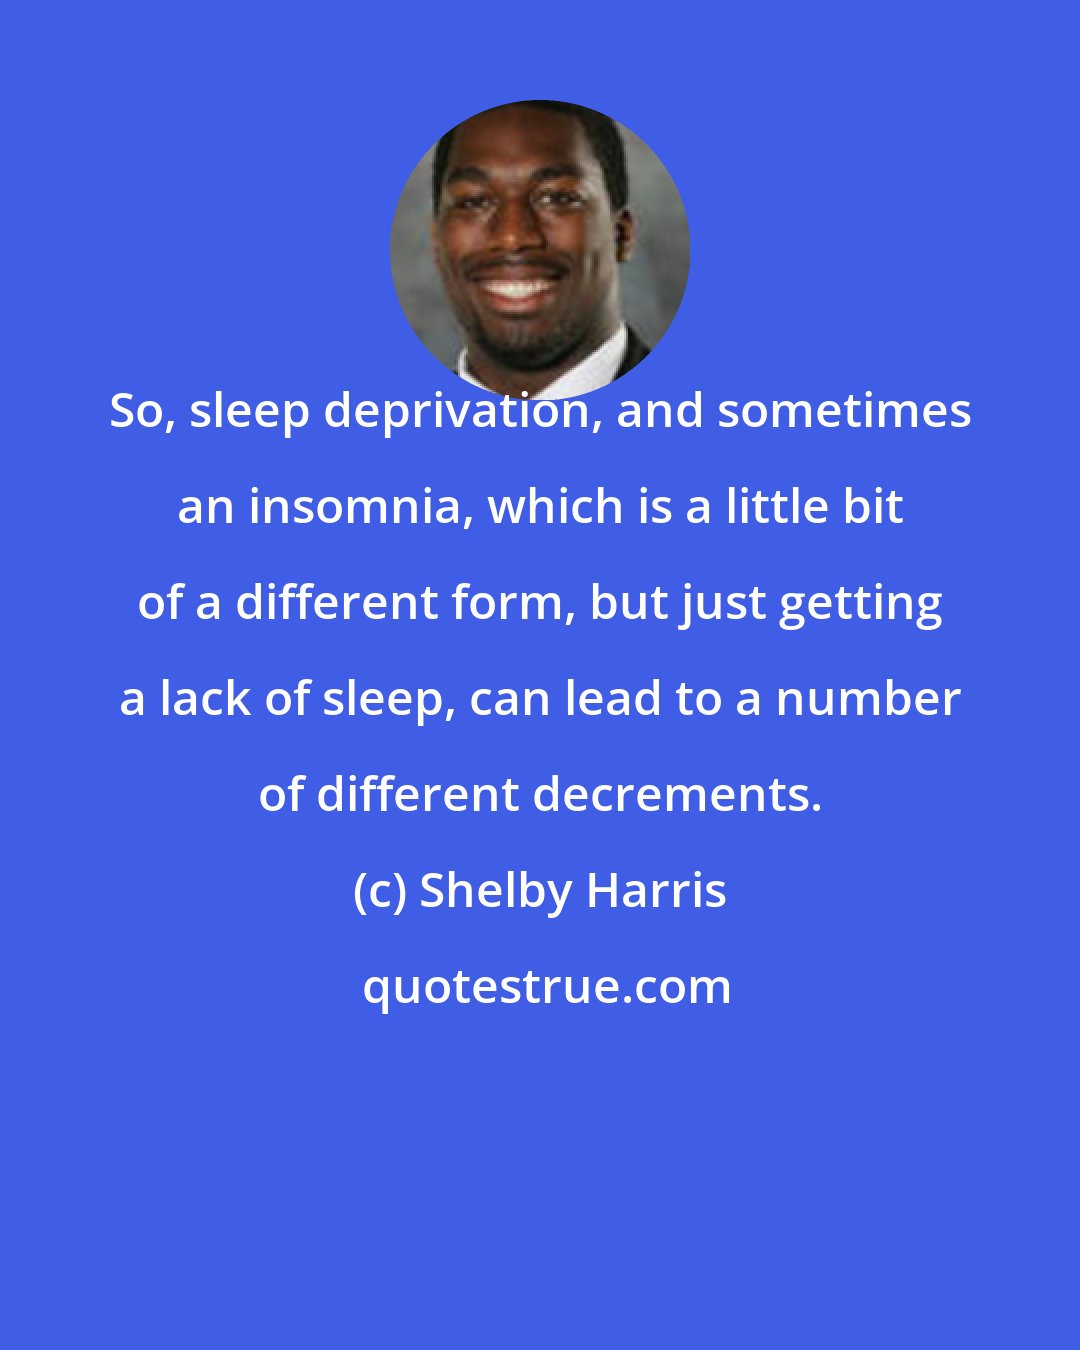 Shelby Harris: So, sleep deprivation, and sometimes an insomnia, which is a little bit of a different form, but just getting a lack of sleep, can lead to a number of different decrements.